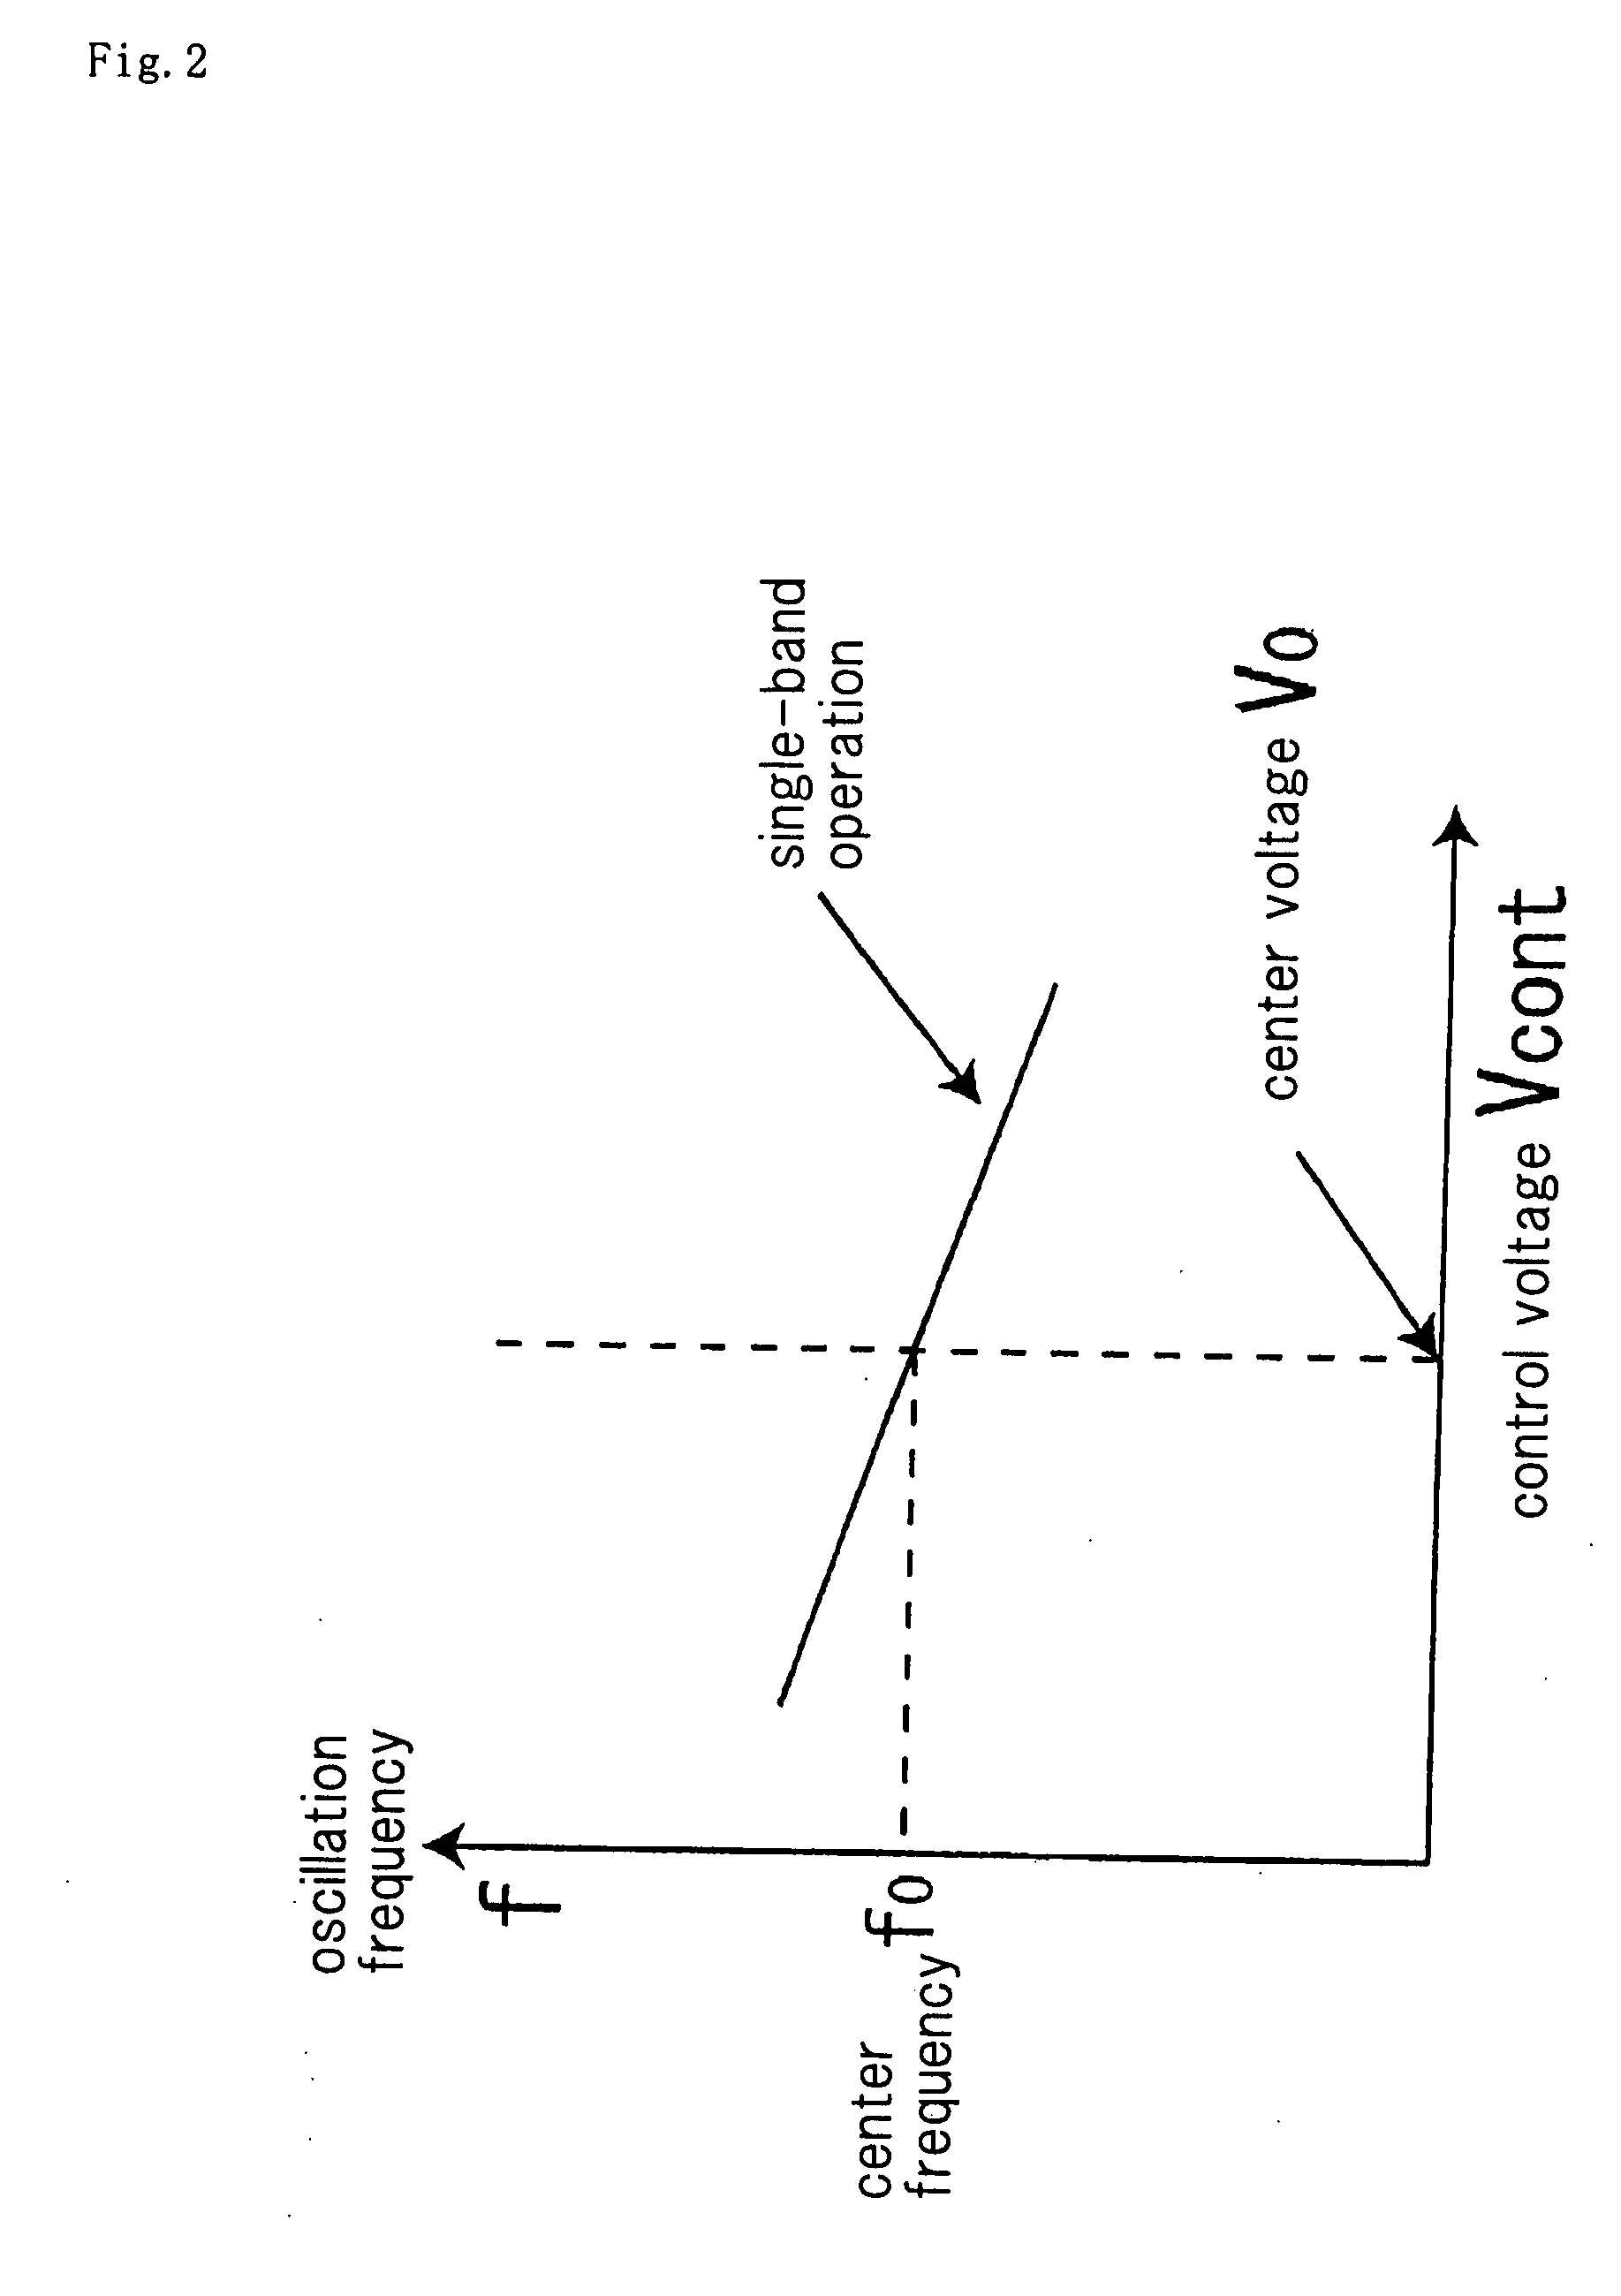 Voltage Controlled Oscillator and Frequency Control Method of the Voltage Controlled Oscillator